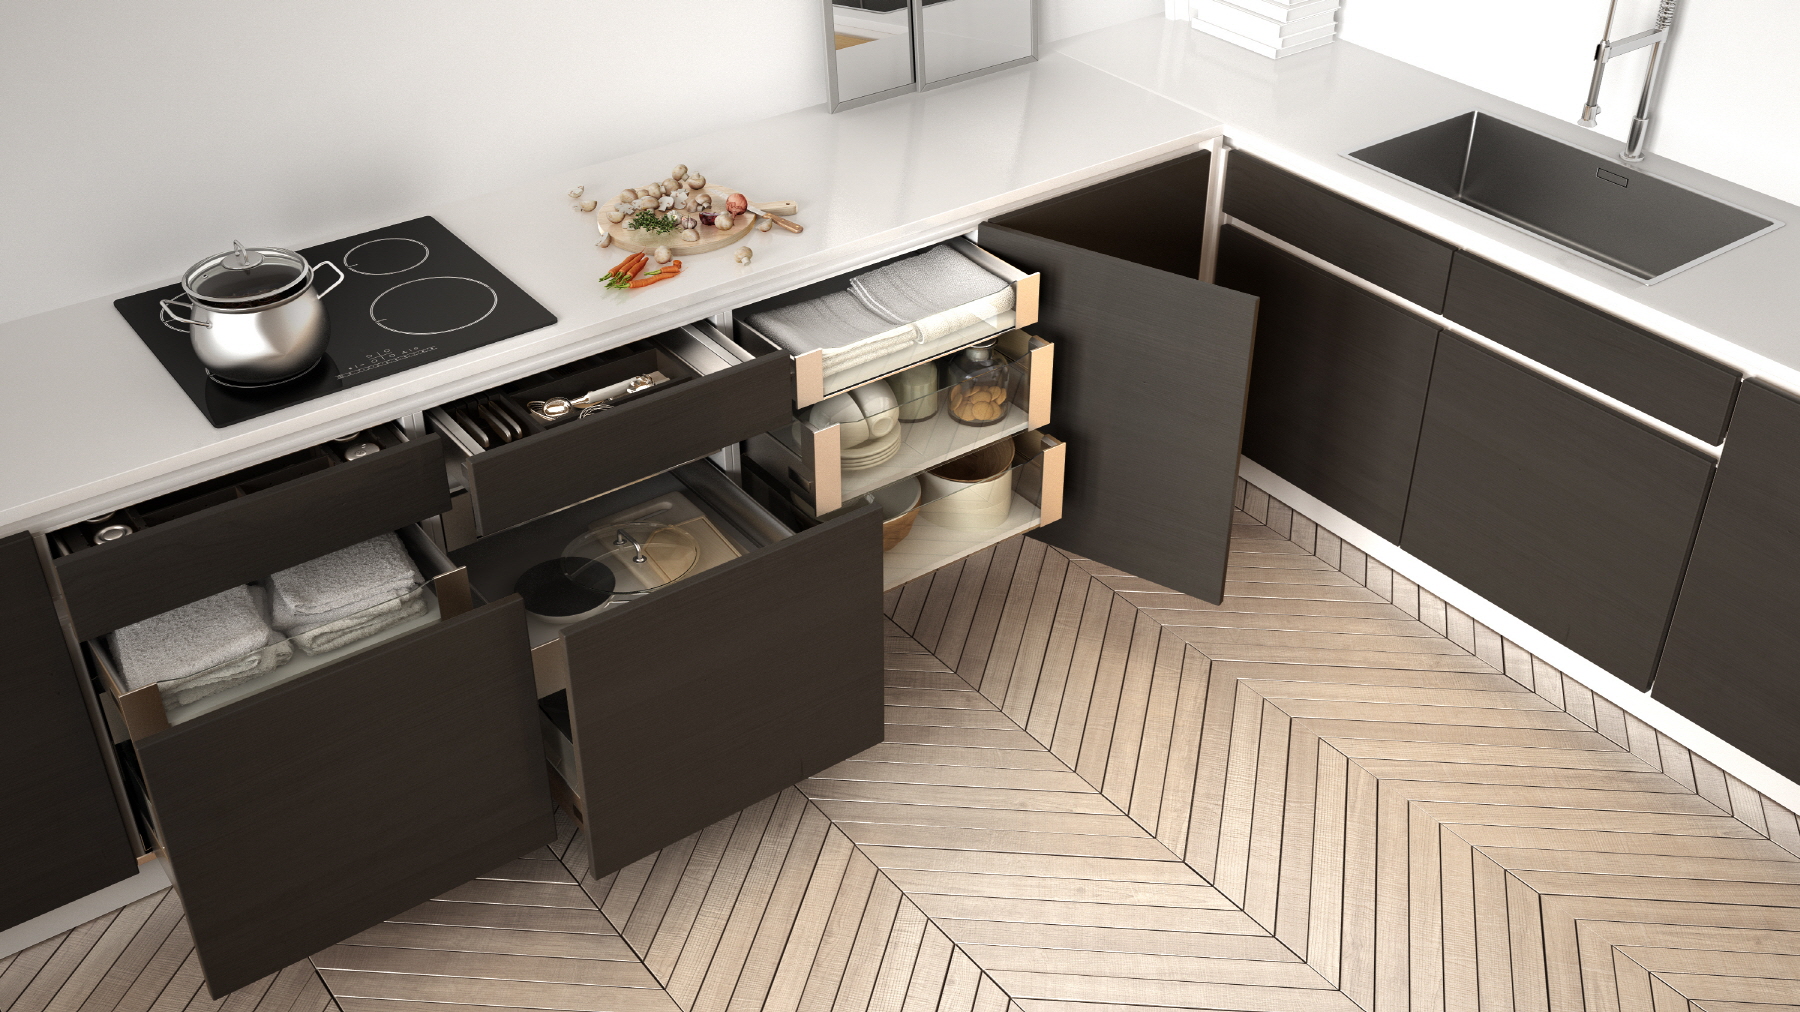 Opt for built-in storage like pull-out drawers and hidden bins for a tidy kitchen look.